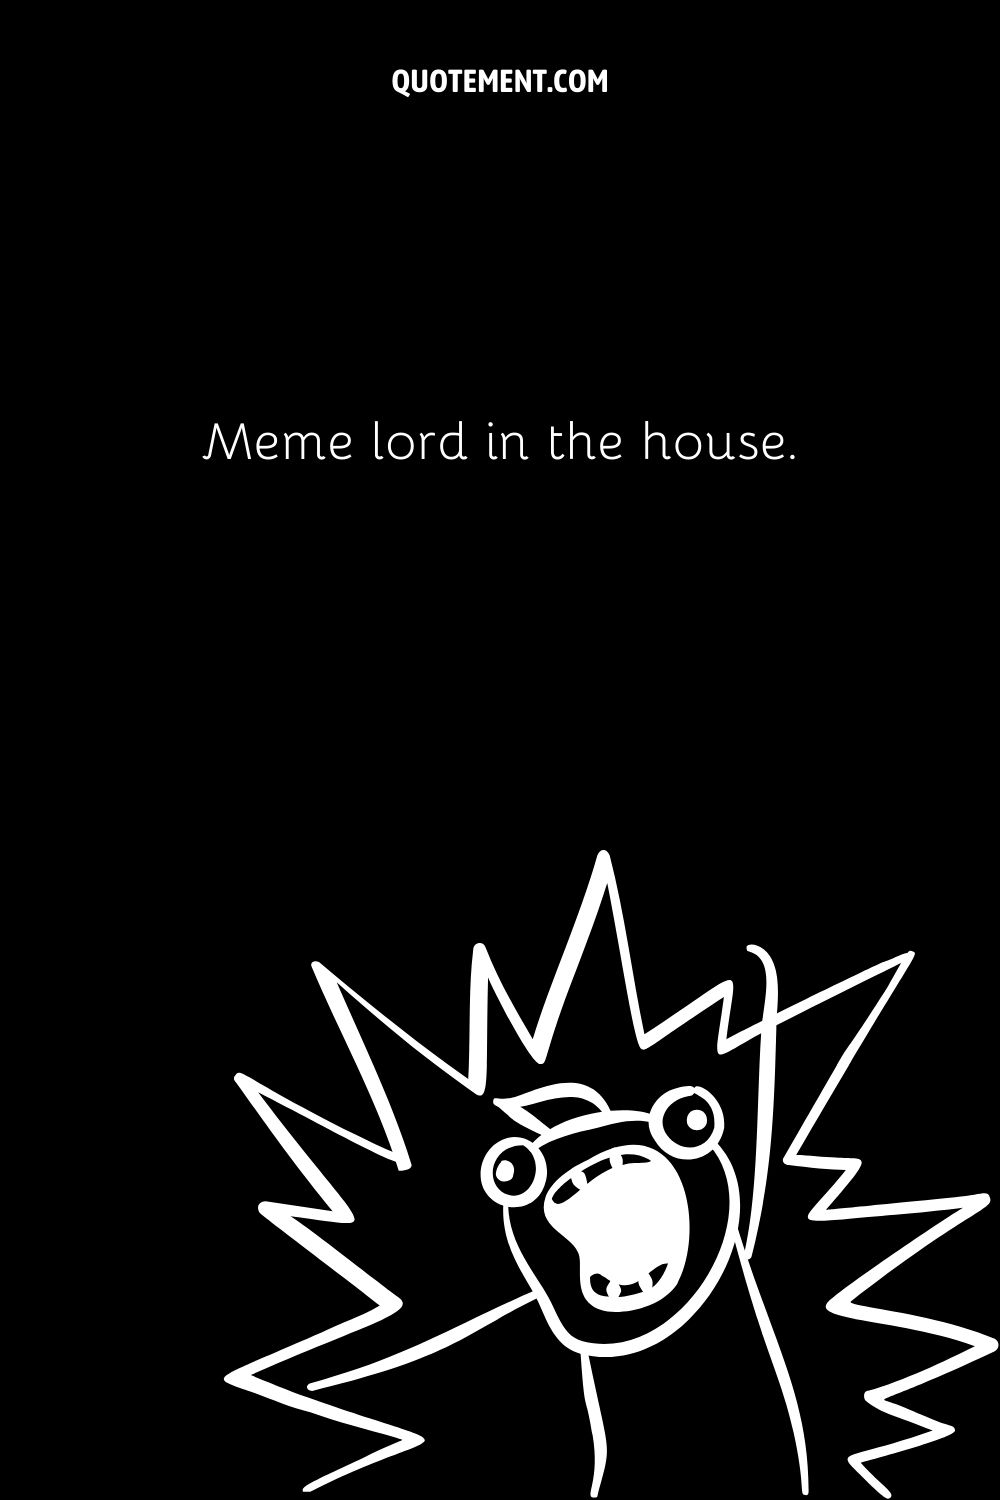 Meme lord in the house.